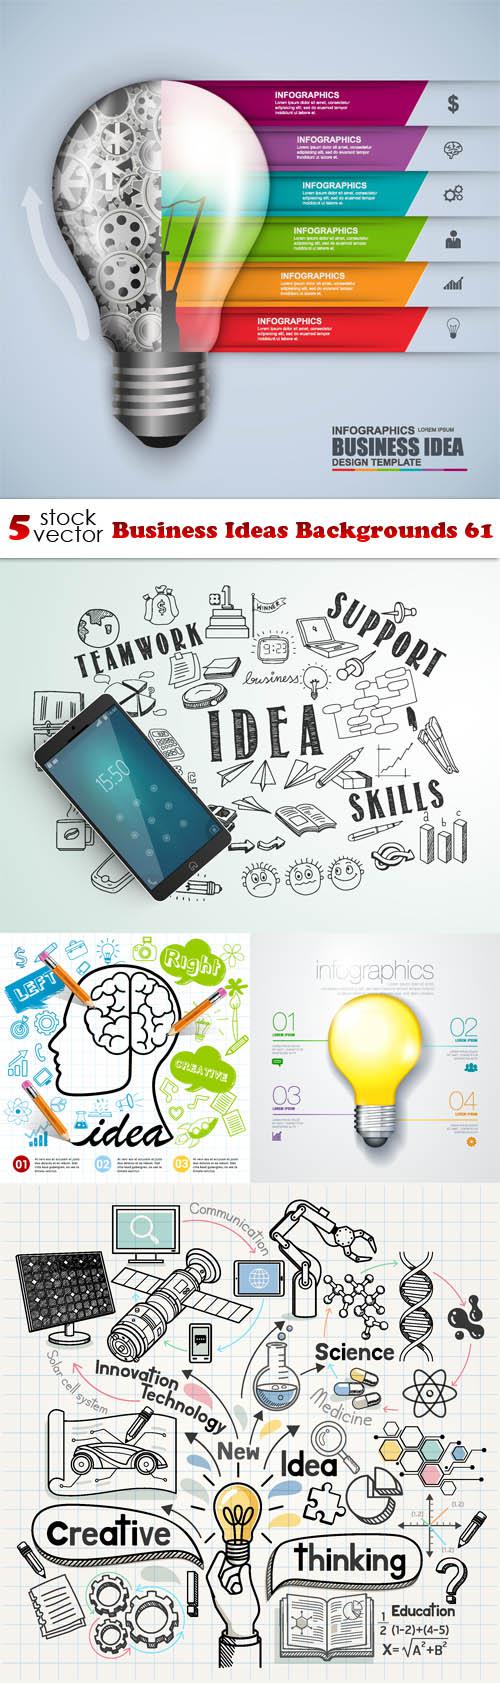 Business Ideas Backgrounds 61